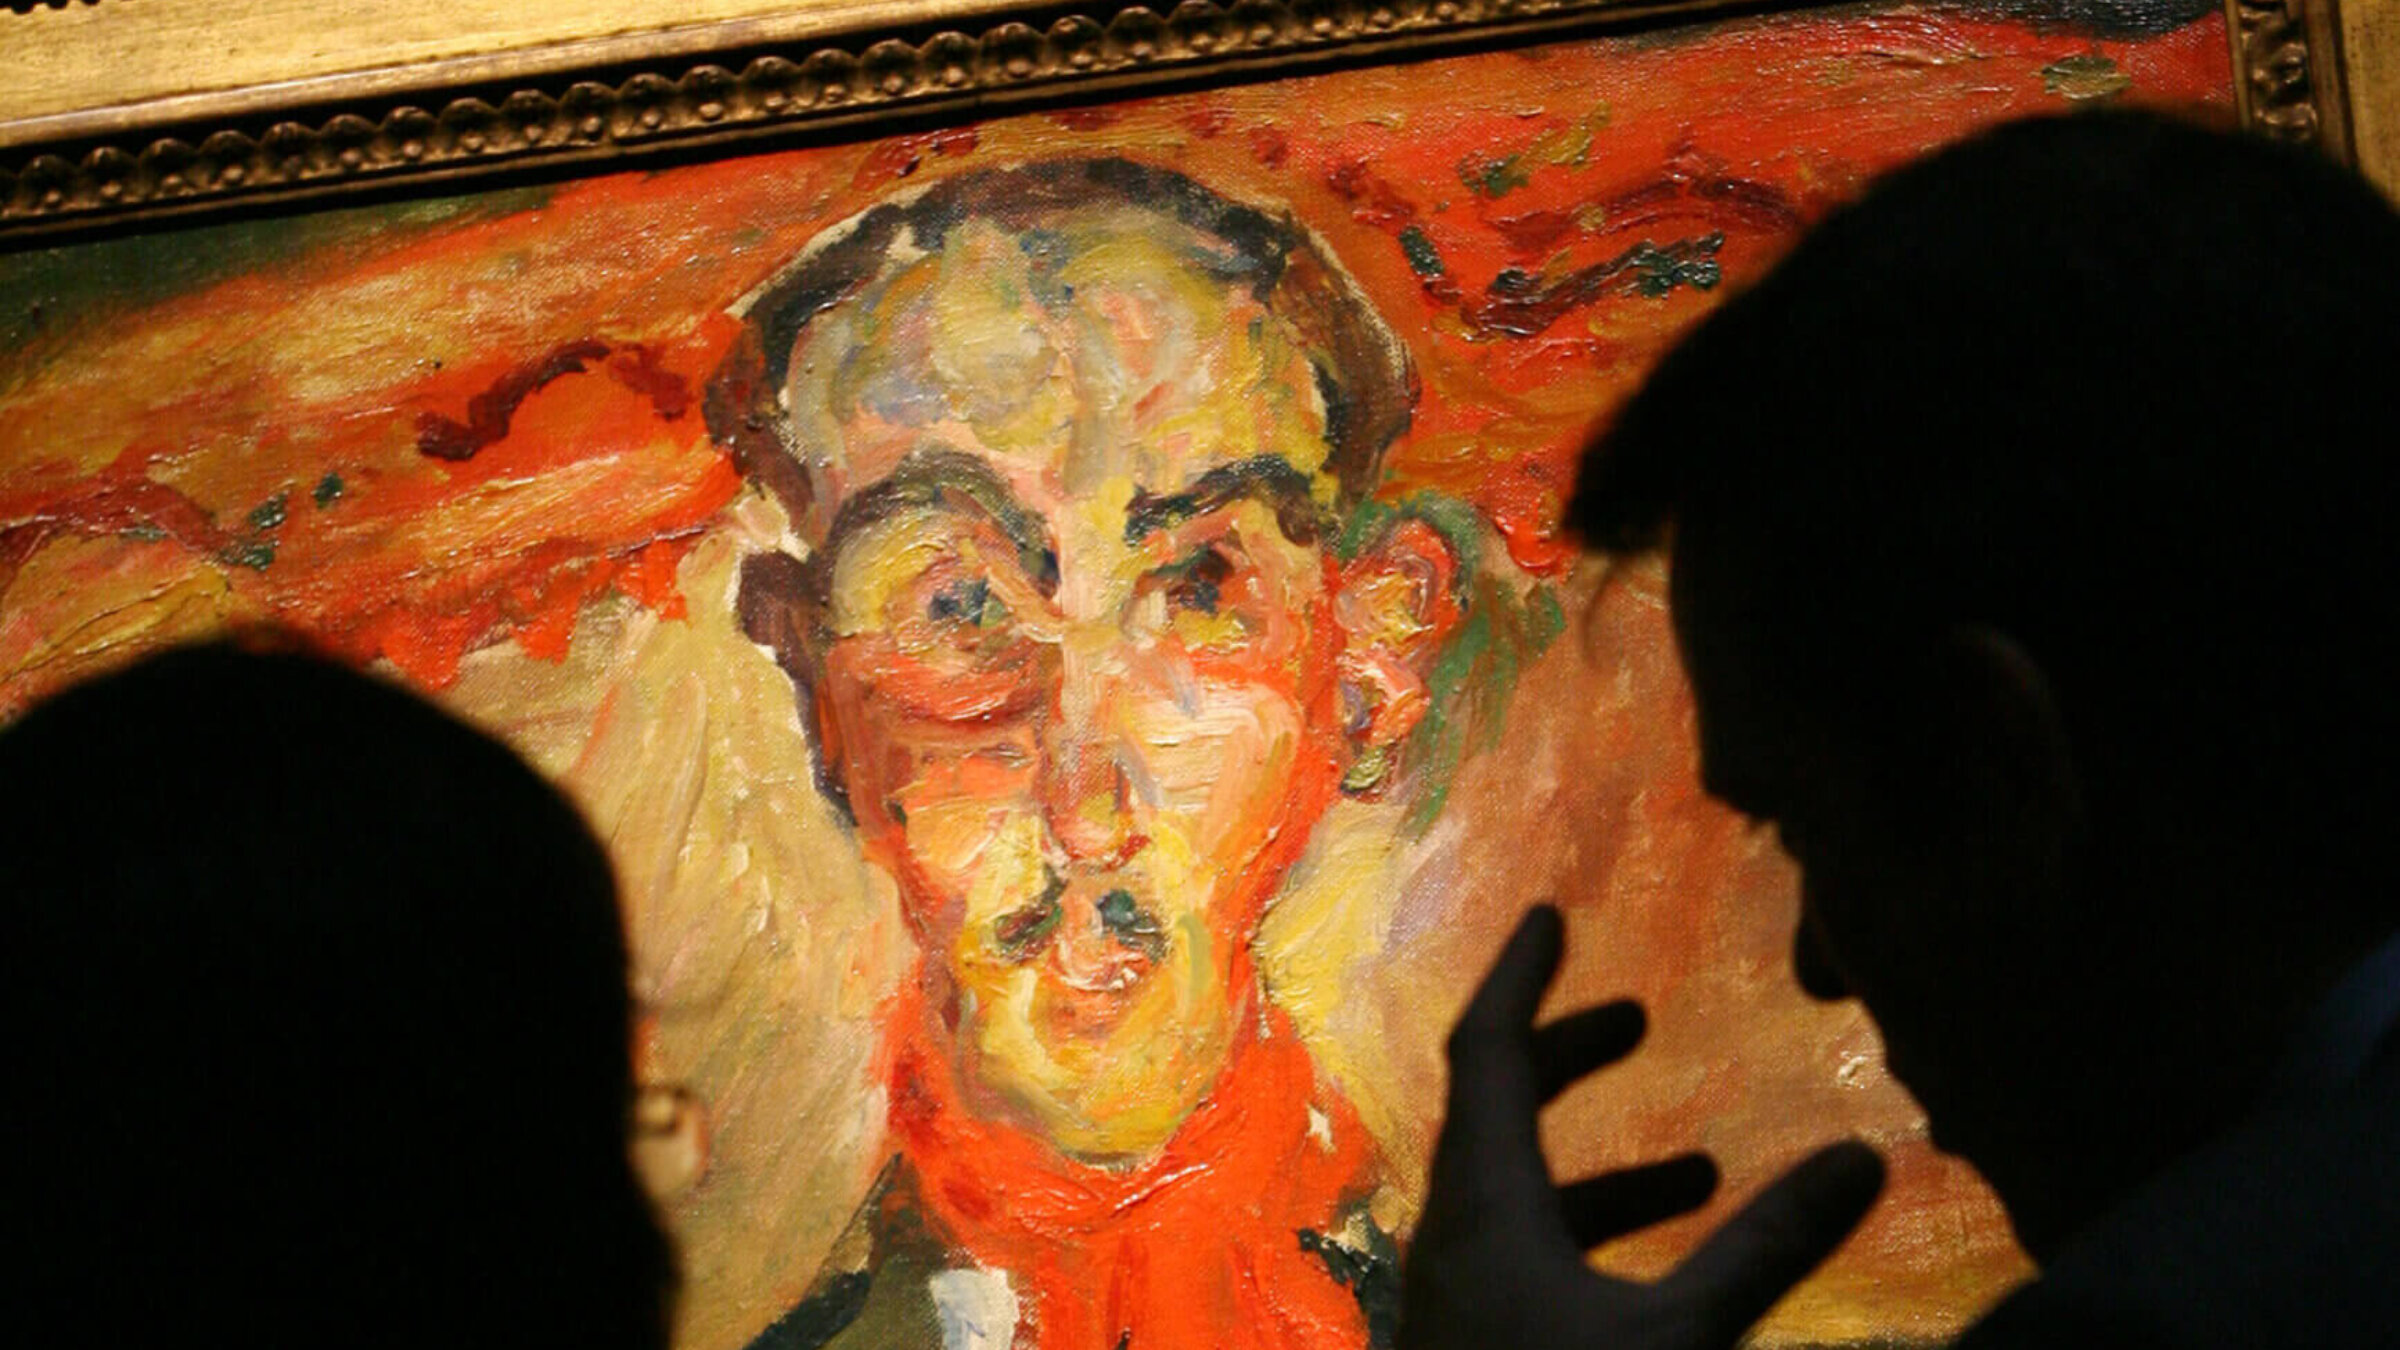  Visitors to the Sotheby's galleries look at a 1921 painting by Chaim Soutine entitled ''L'Homme au Foulard Rouge."